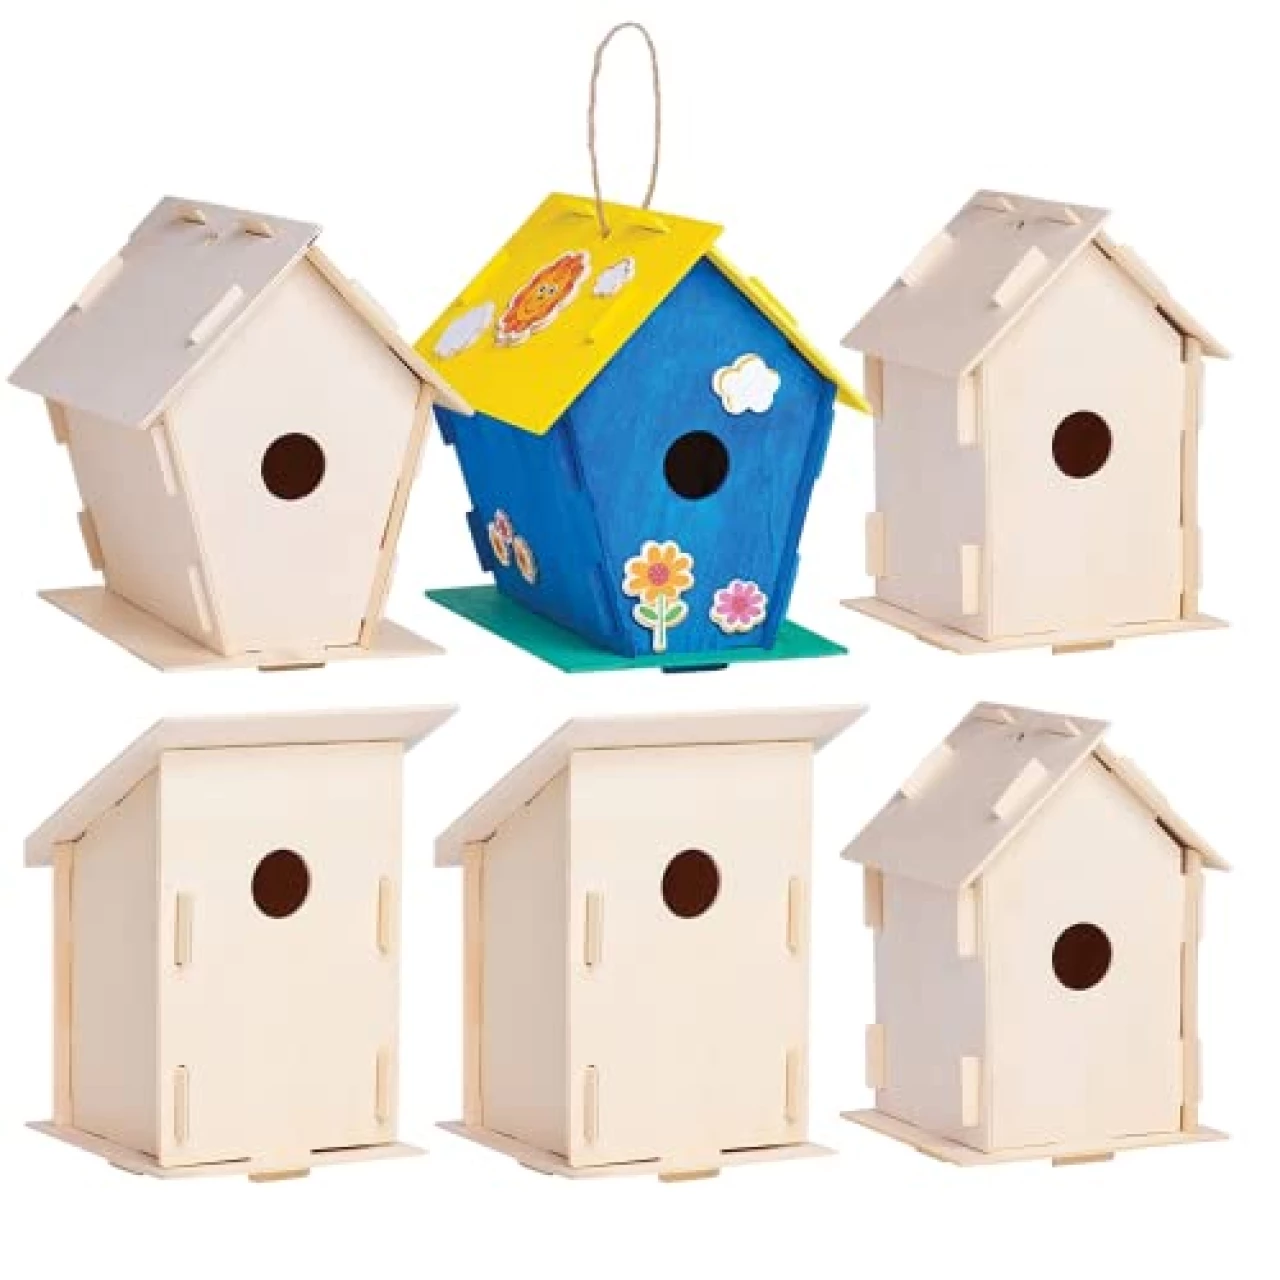 Neliblu 12 Wooden Birdhouses - Kids Bulk Arts and Crafts Set for Girls &amp; Boys - 12 DIY Unfinished Wood Birdhouse Kits, 12 Paint Strips, 12 Brushes &amp; Stickers - Bird House Kits for Children